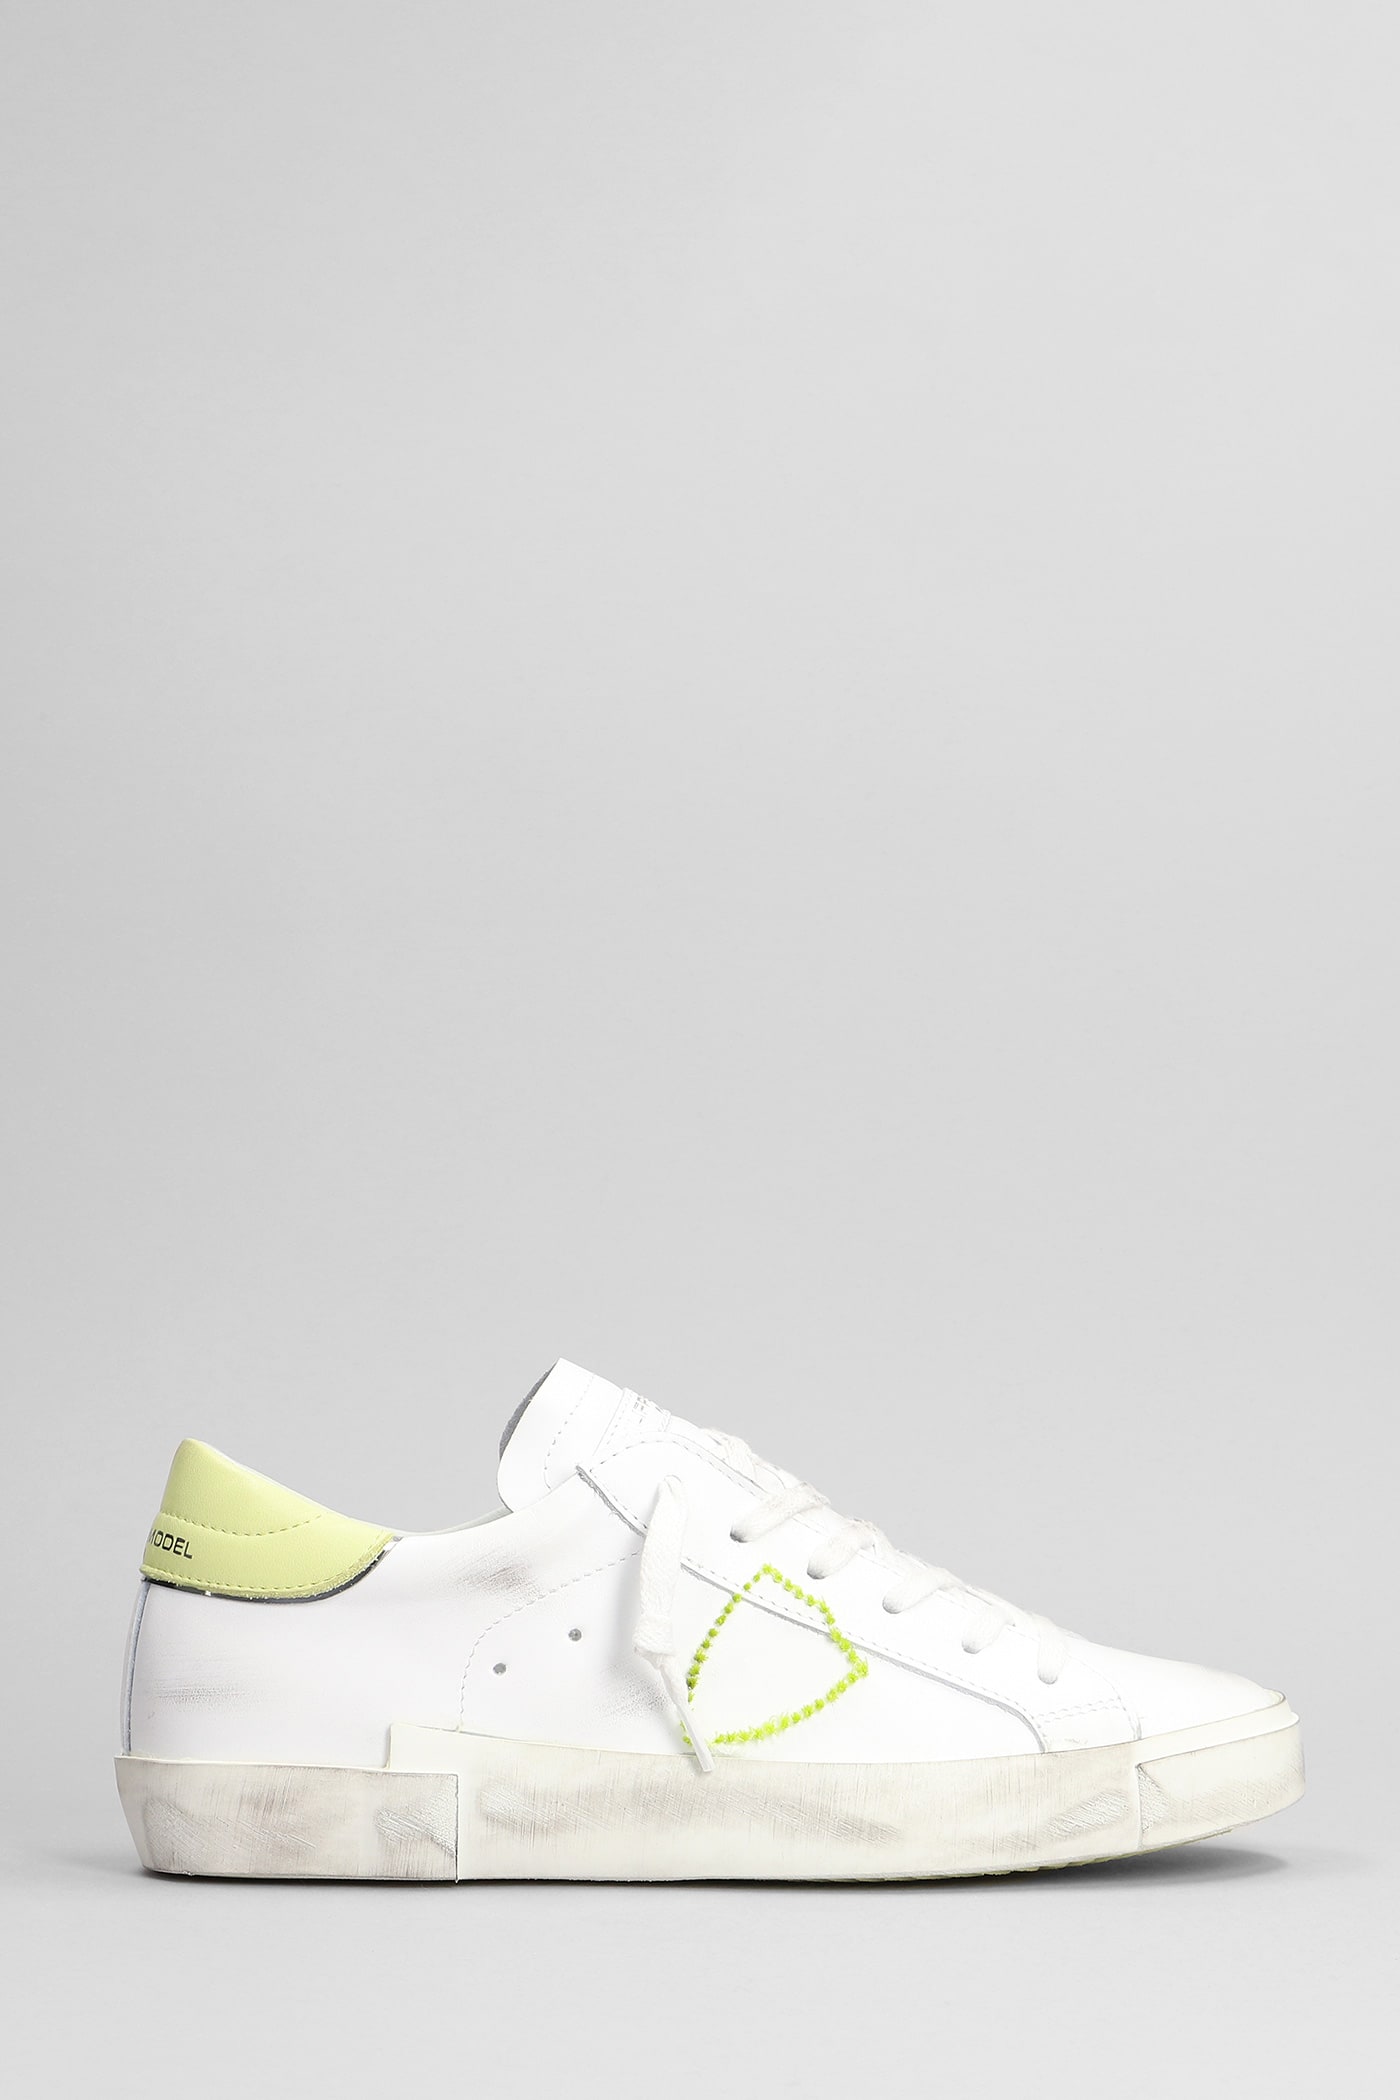 Philippe Model Prsx Sneakers In White Leather